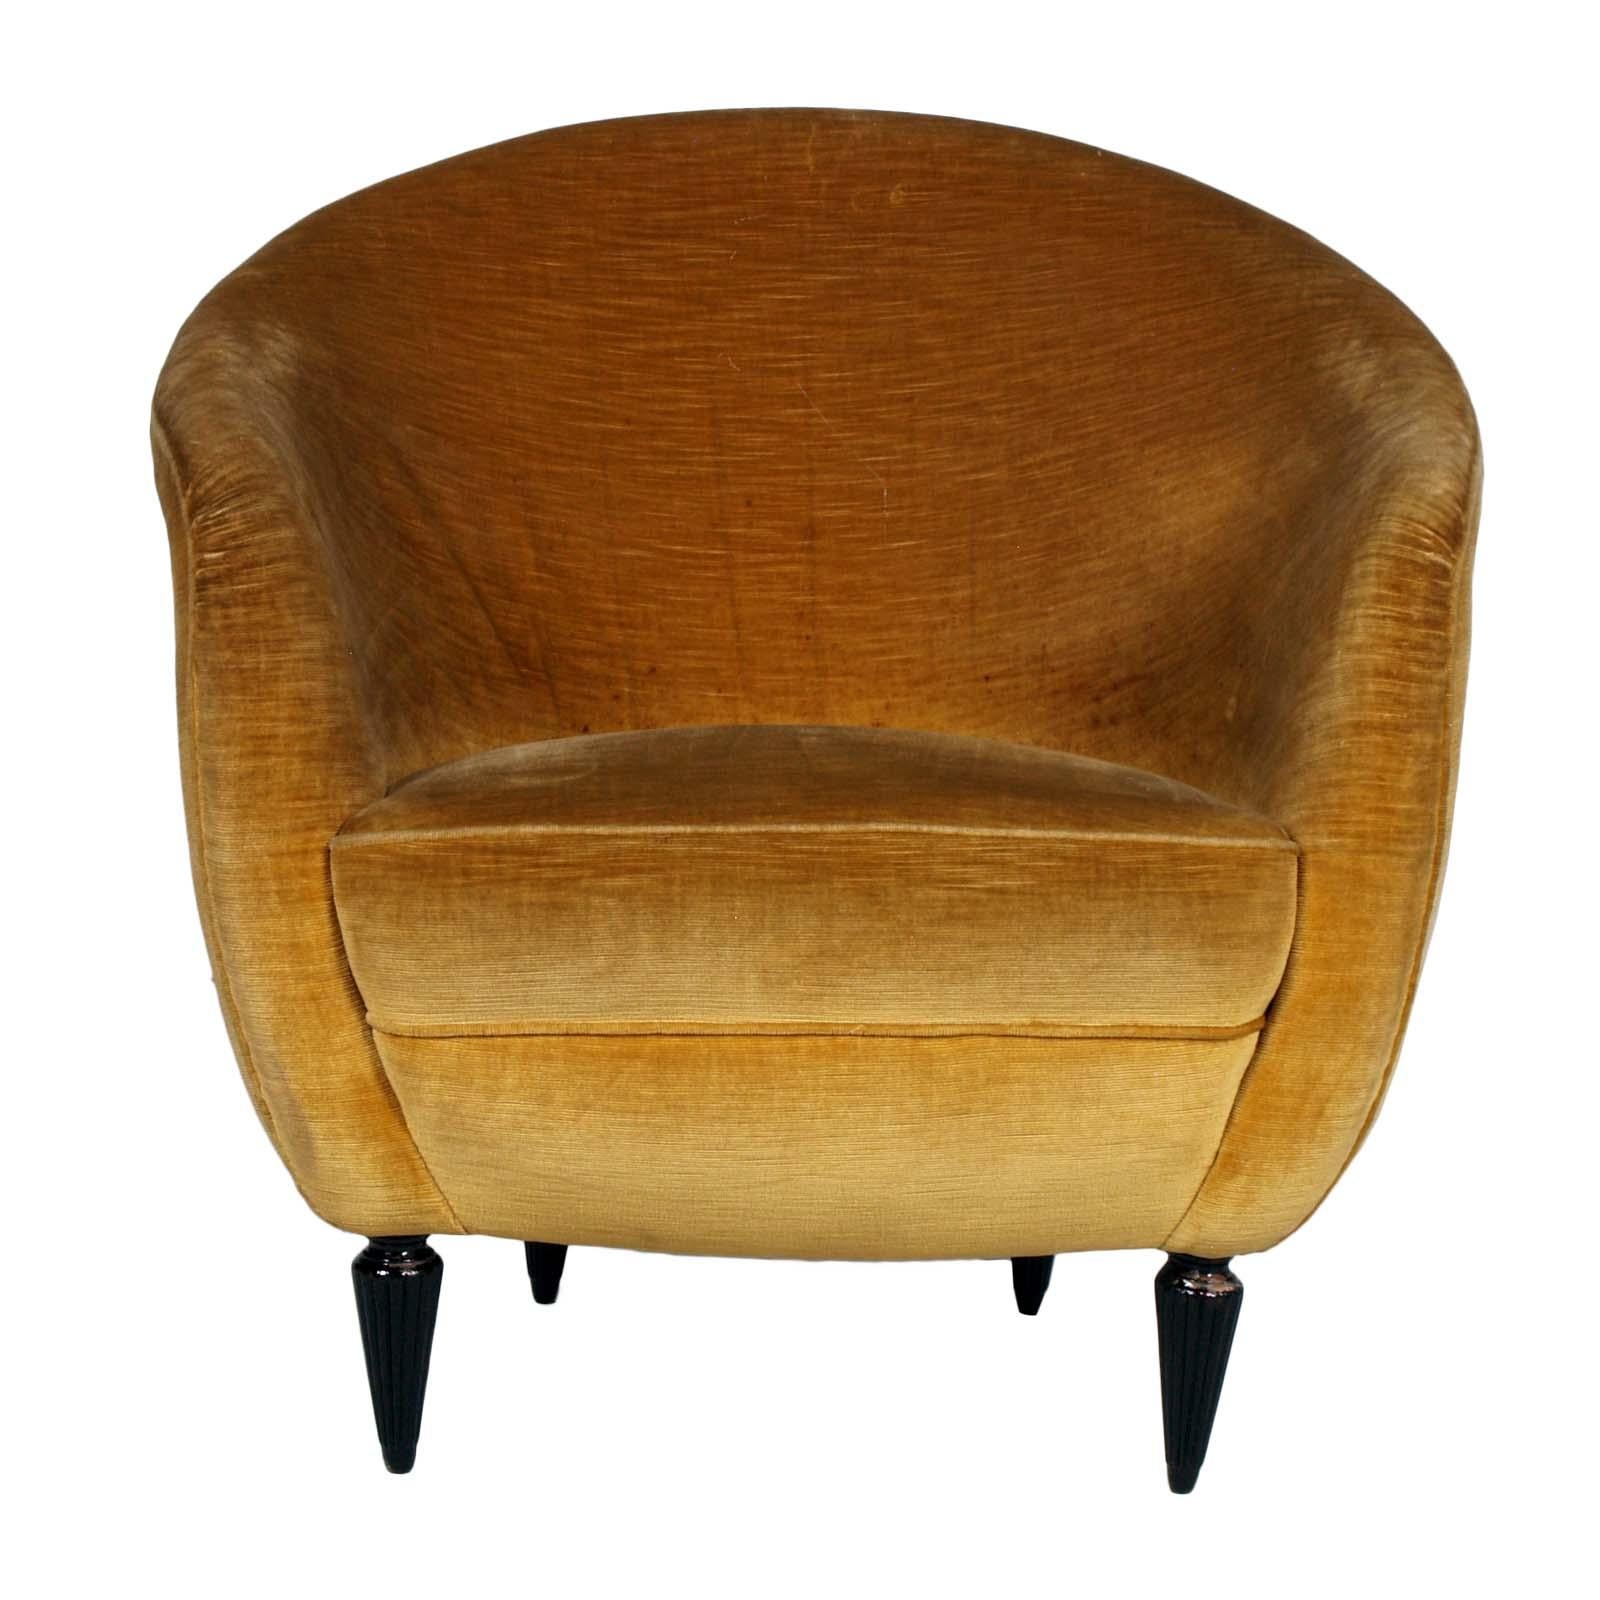 1940s Armchair Gio Ponti design attributed by Figli di Amedeo Cassina with original velvet upholstery still usable. 

Measures cm: H 40/73, W 75, D 70.

Provenance:
From the heirs of the Della Torre family of Rezzonico, on Lake Como
History ,